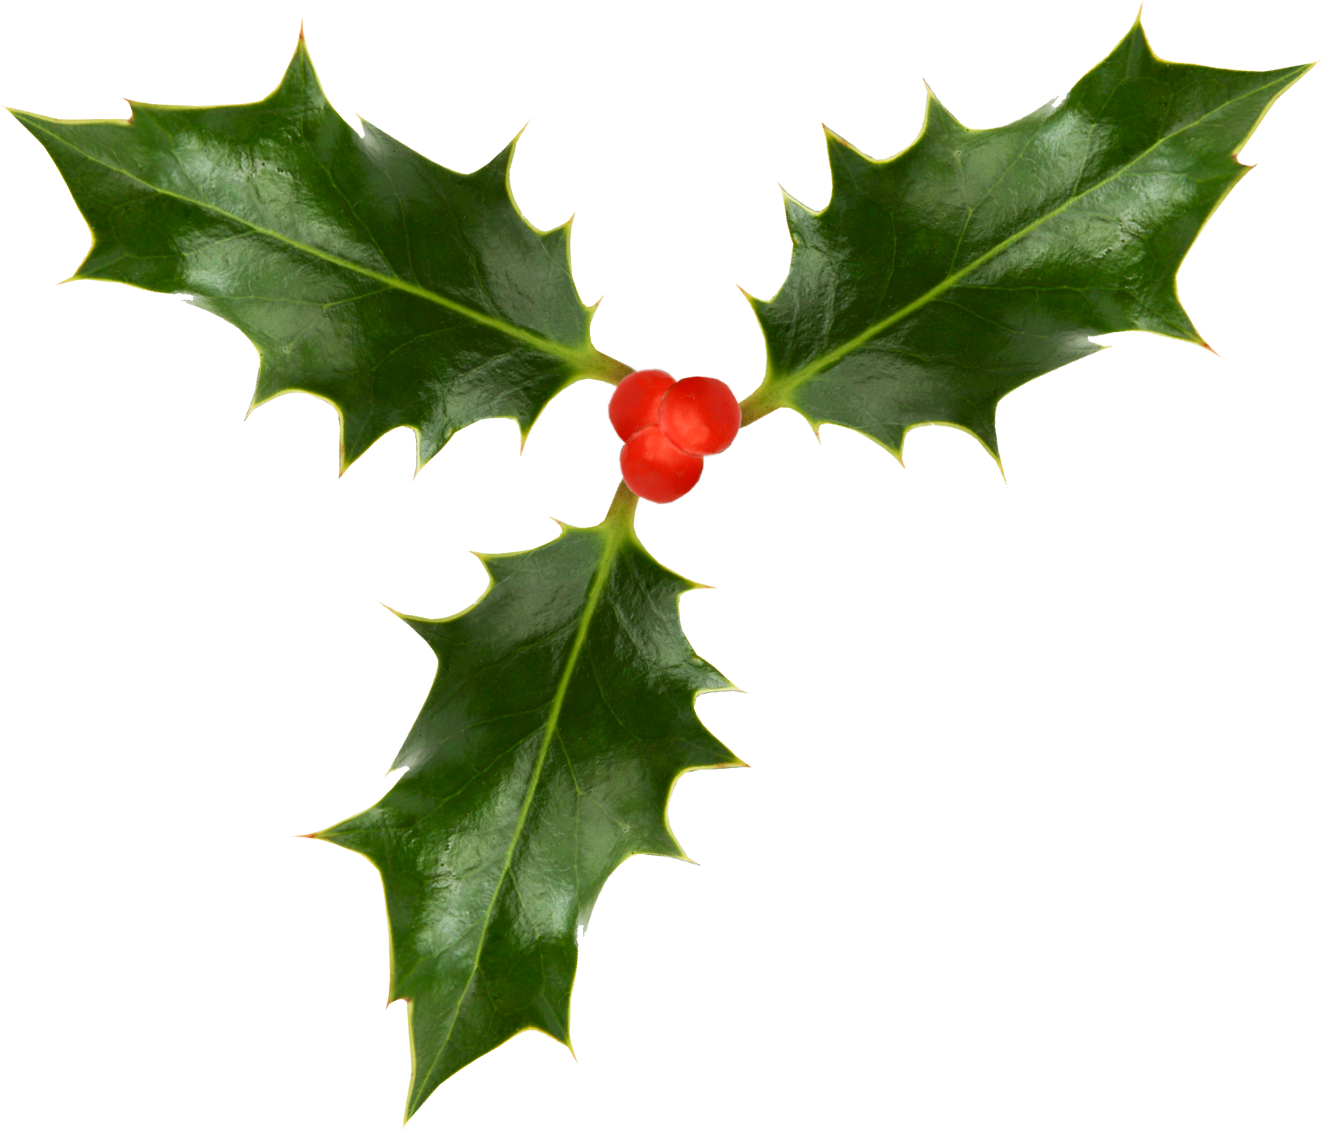 Download Transparent Holly Real Svg Black And White Holly Leaf Transparent Background Png Image With No Background Pngkey Com